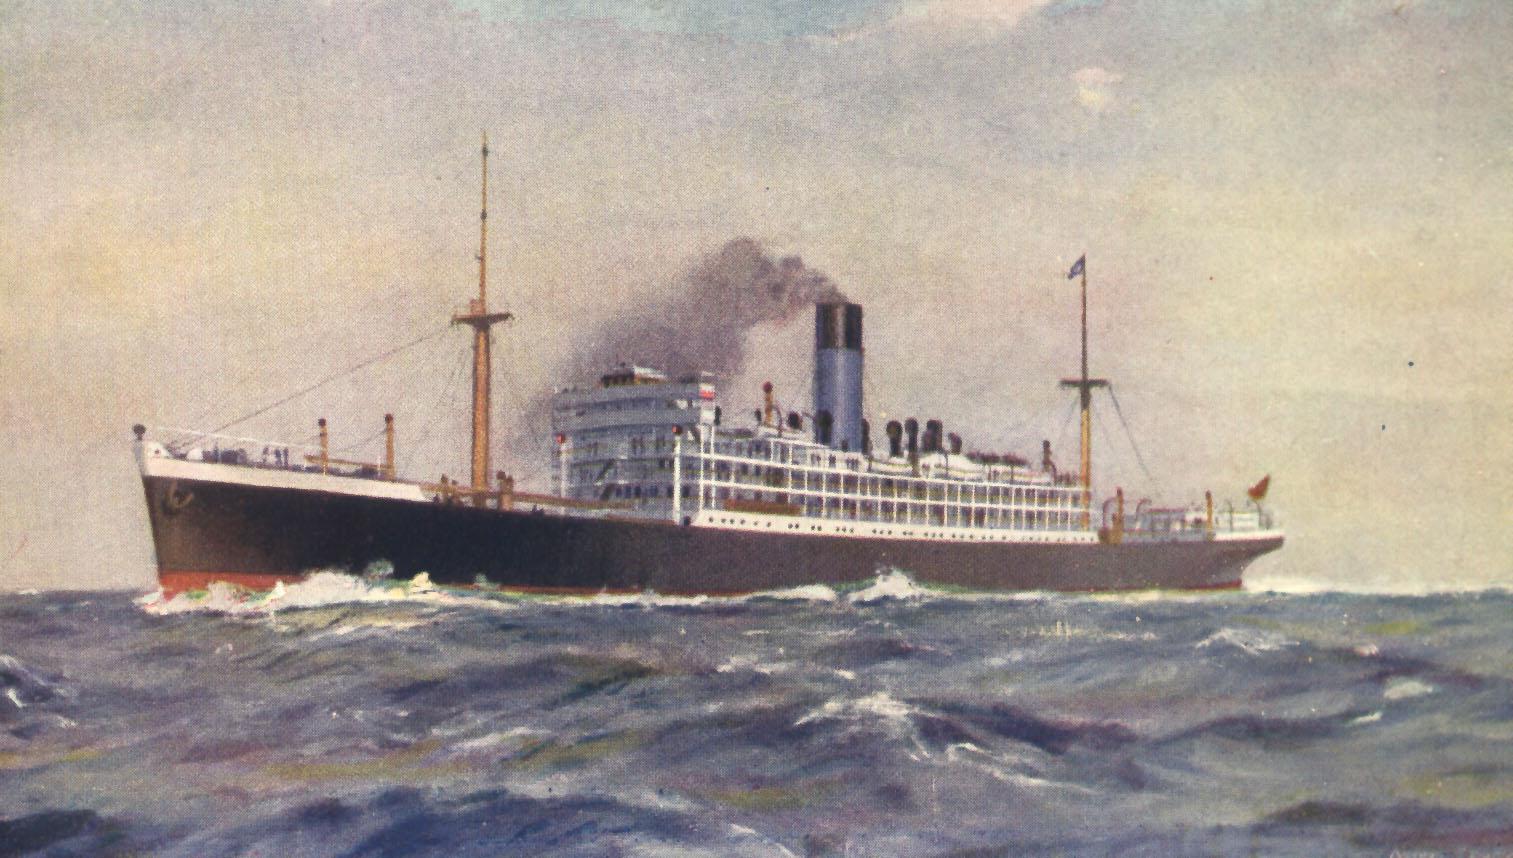 Passenger Vessel "Nestor", built in 1912 by Workman & Clark & Co - Belfast.  Owned by Blue Funnel Line and worked route between UK - Australia - UK.  She took her first voyage in 1913 and in 1915 was commandeered as a troopship.  In 1920 she resumed servi